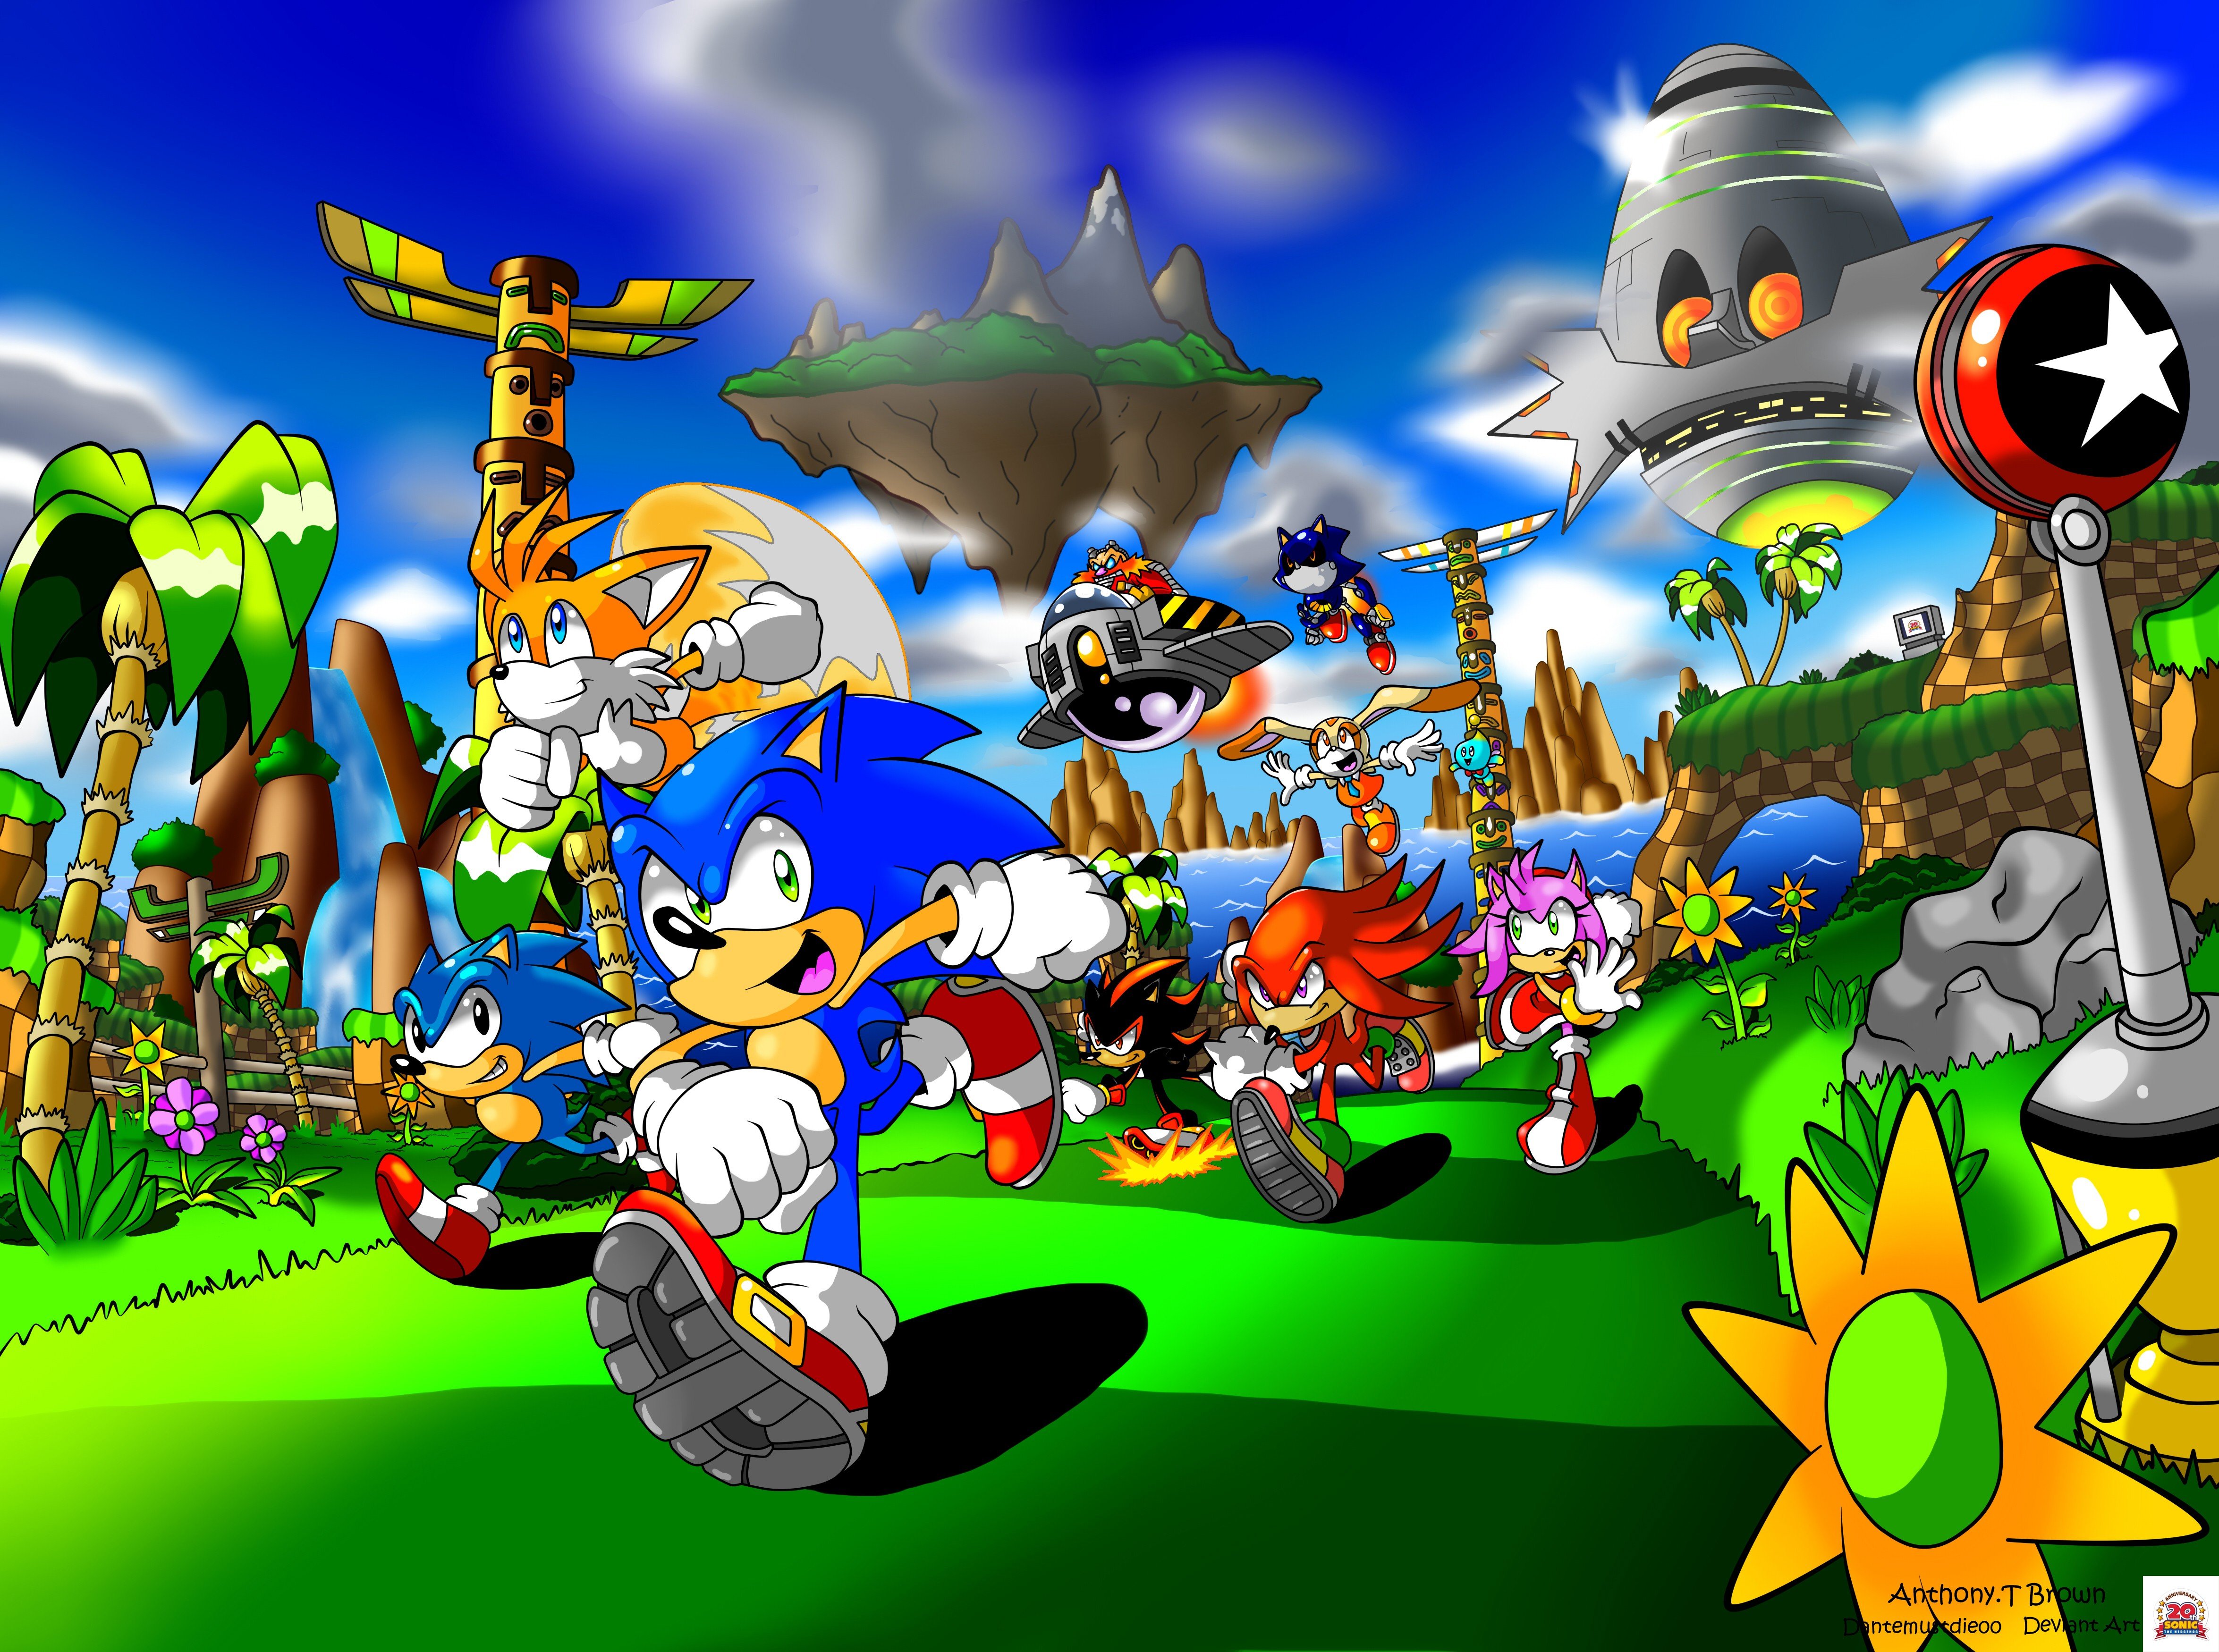 Sonic Tails Knuckles Wallpaper